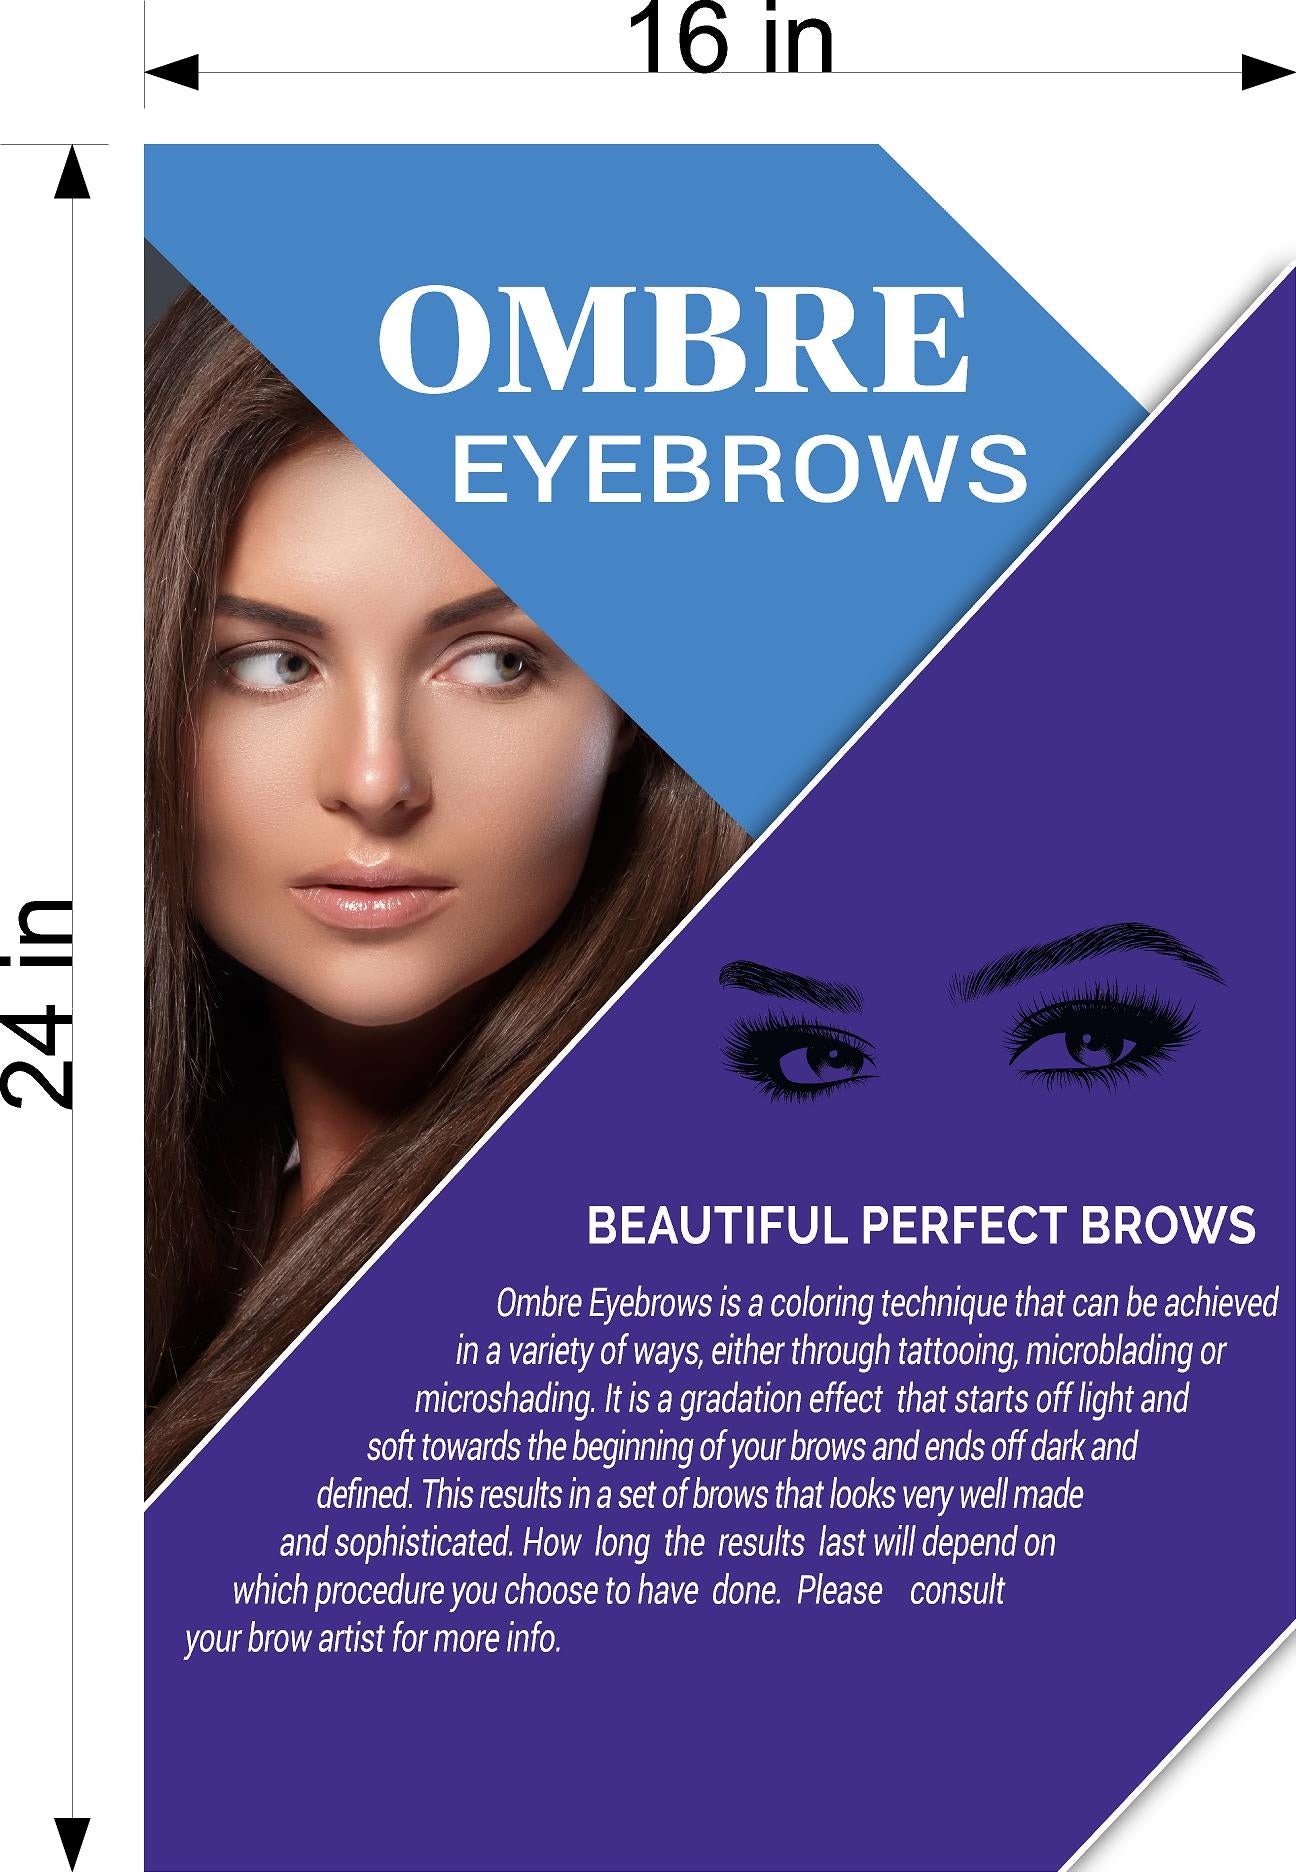 Ombre Eyebrows 06 Photo-Realistic Paper Poster Premium Interior Inside Sign Advertising Marketing Wall Window Non-Laminated Vertical